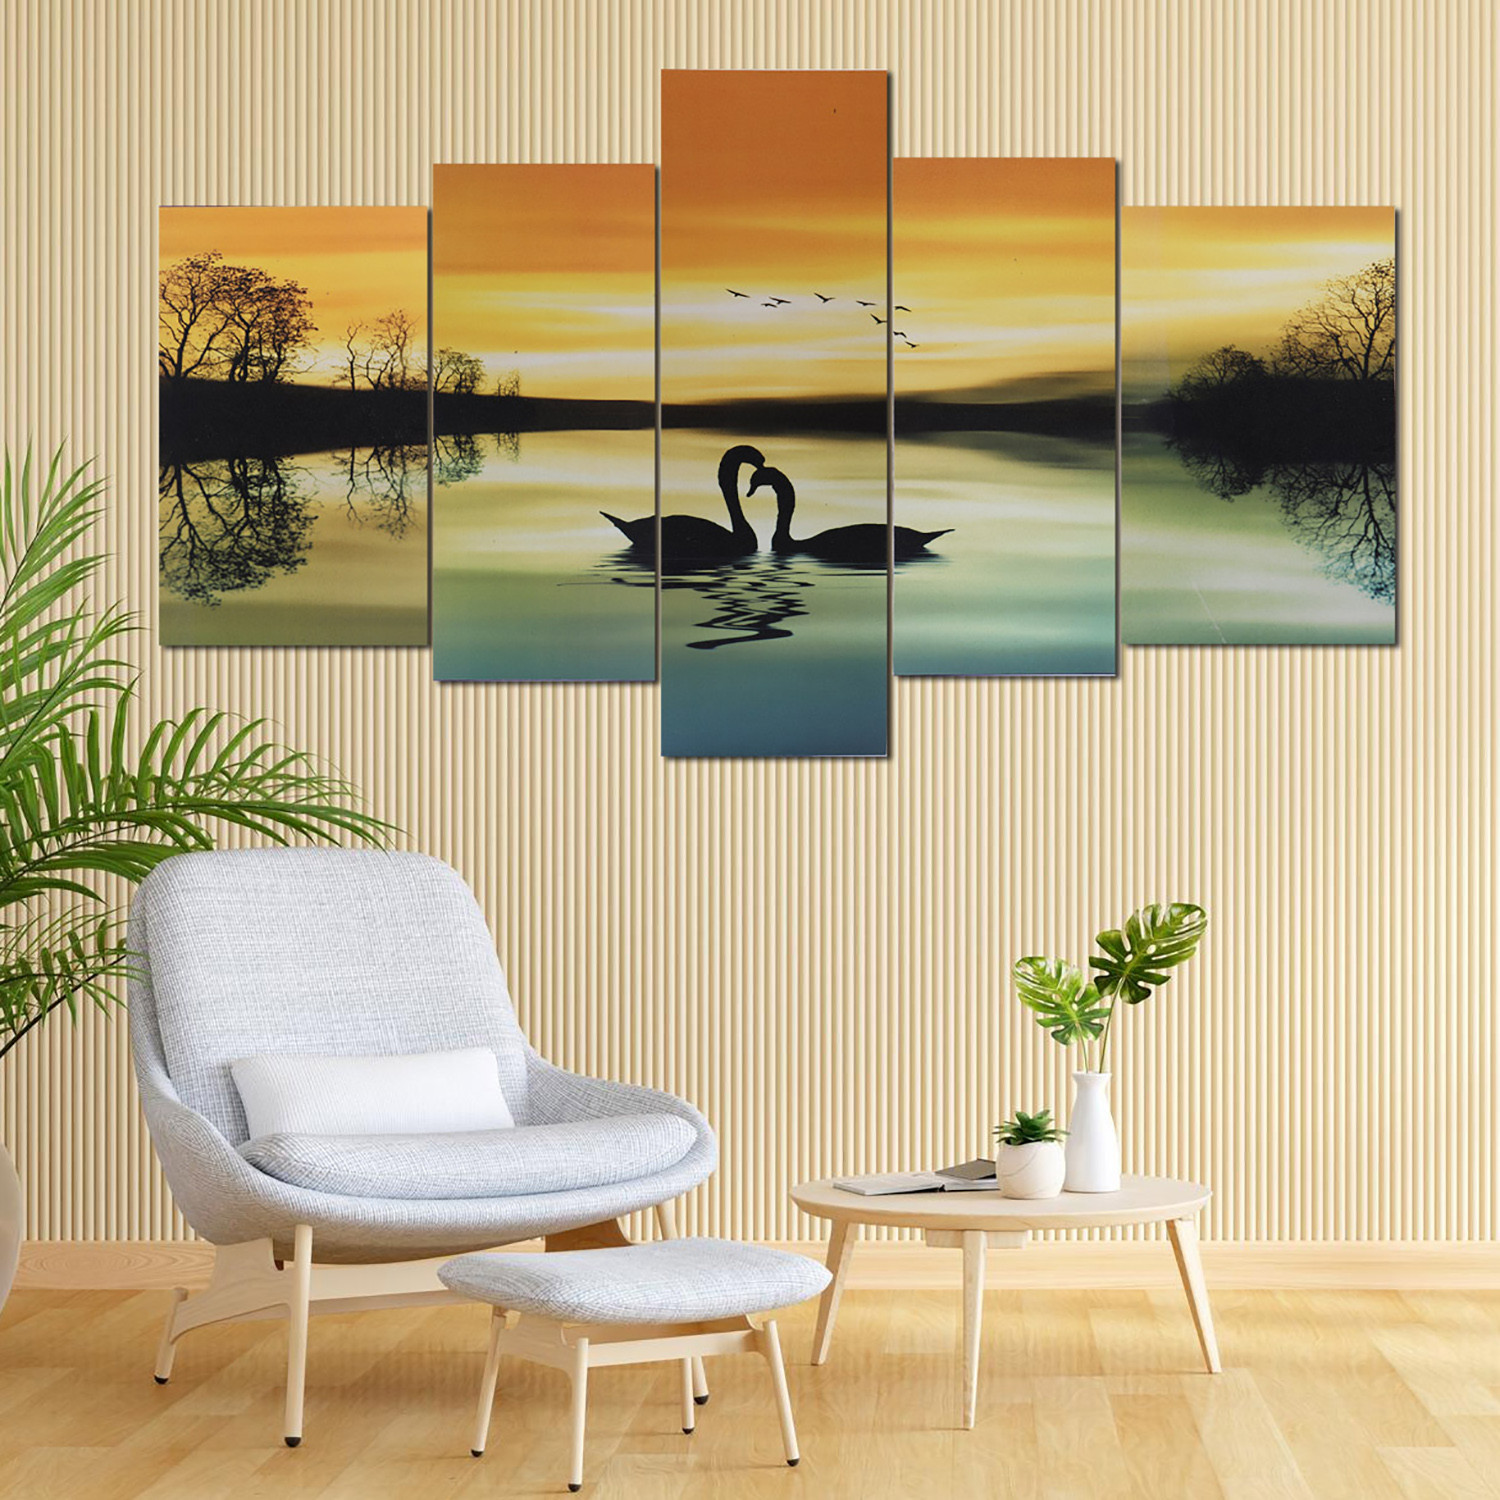 Kuber Industries Wall Paintings | MDF Wooden Wall Art for Living Room |Wall Sculpture | Swan Painting for Bedroom | Office | Hotels | Gift | 2450KIDR2 |5 Piece Set| Multicolor